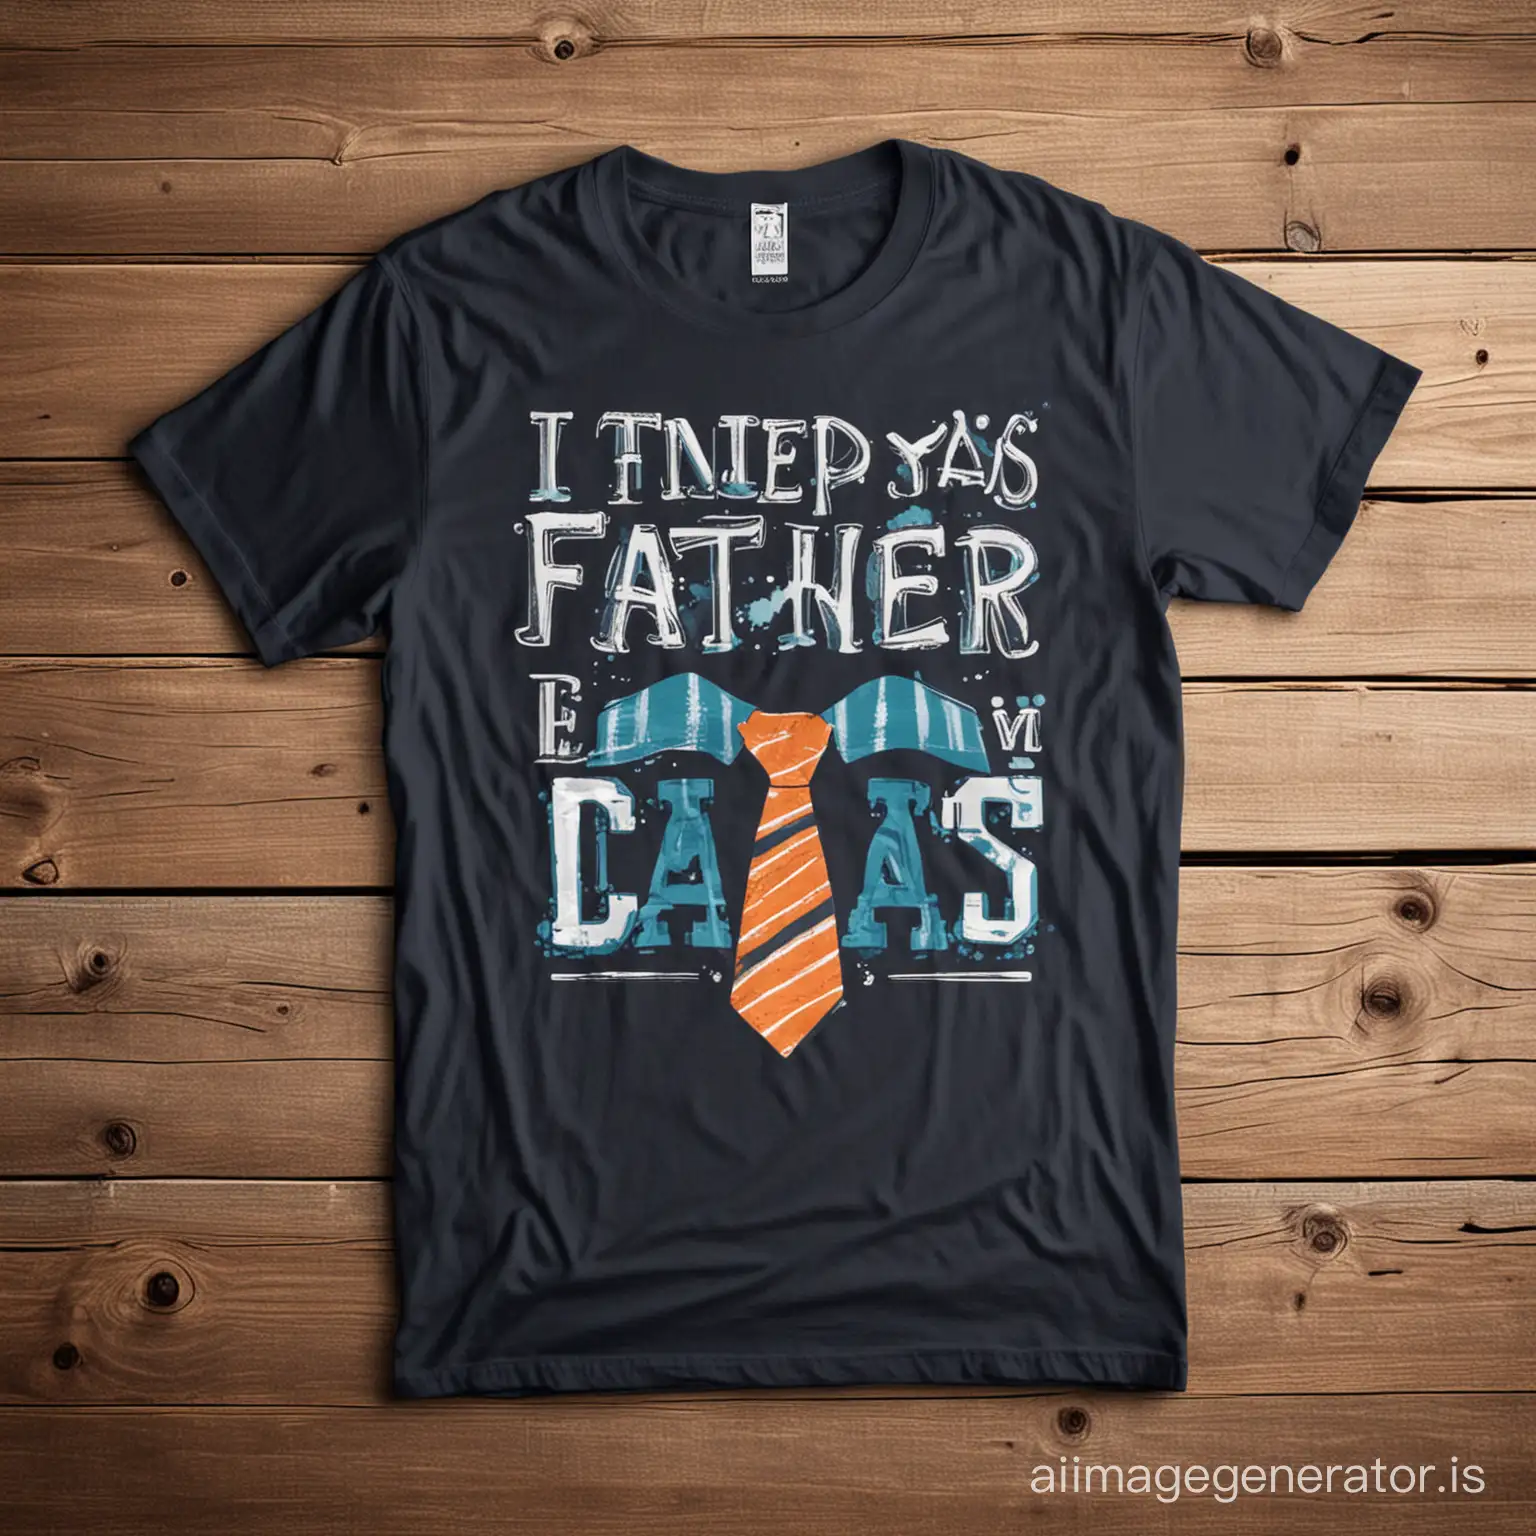 Fathers-Day-Shirt-Design-Ideas-Creative-Designs-for-Celebrating-Dads